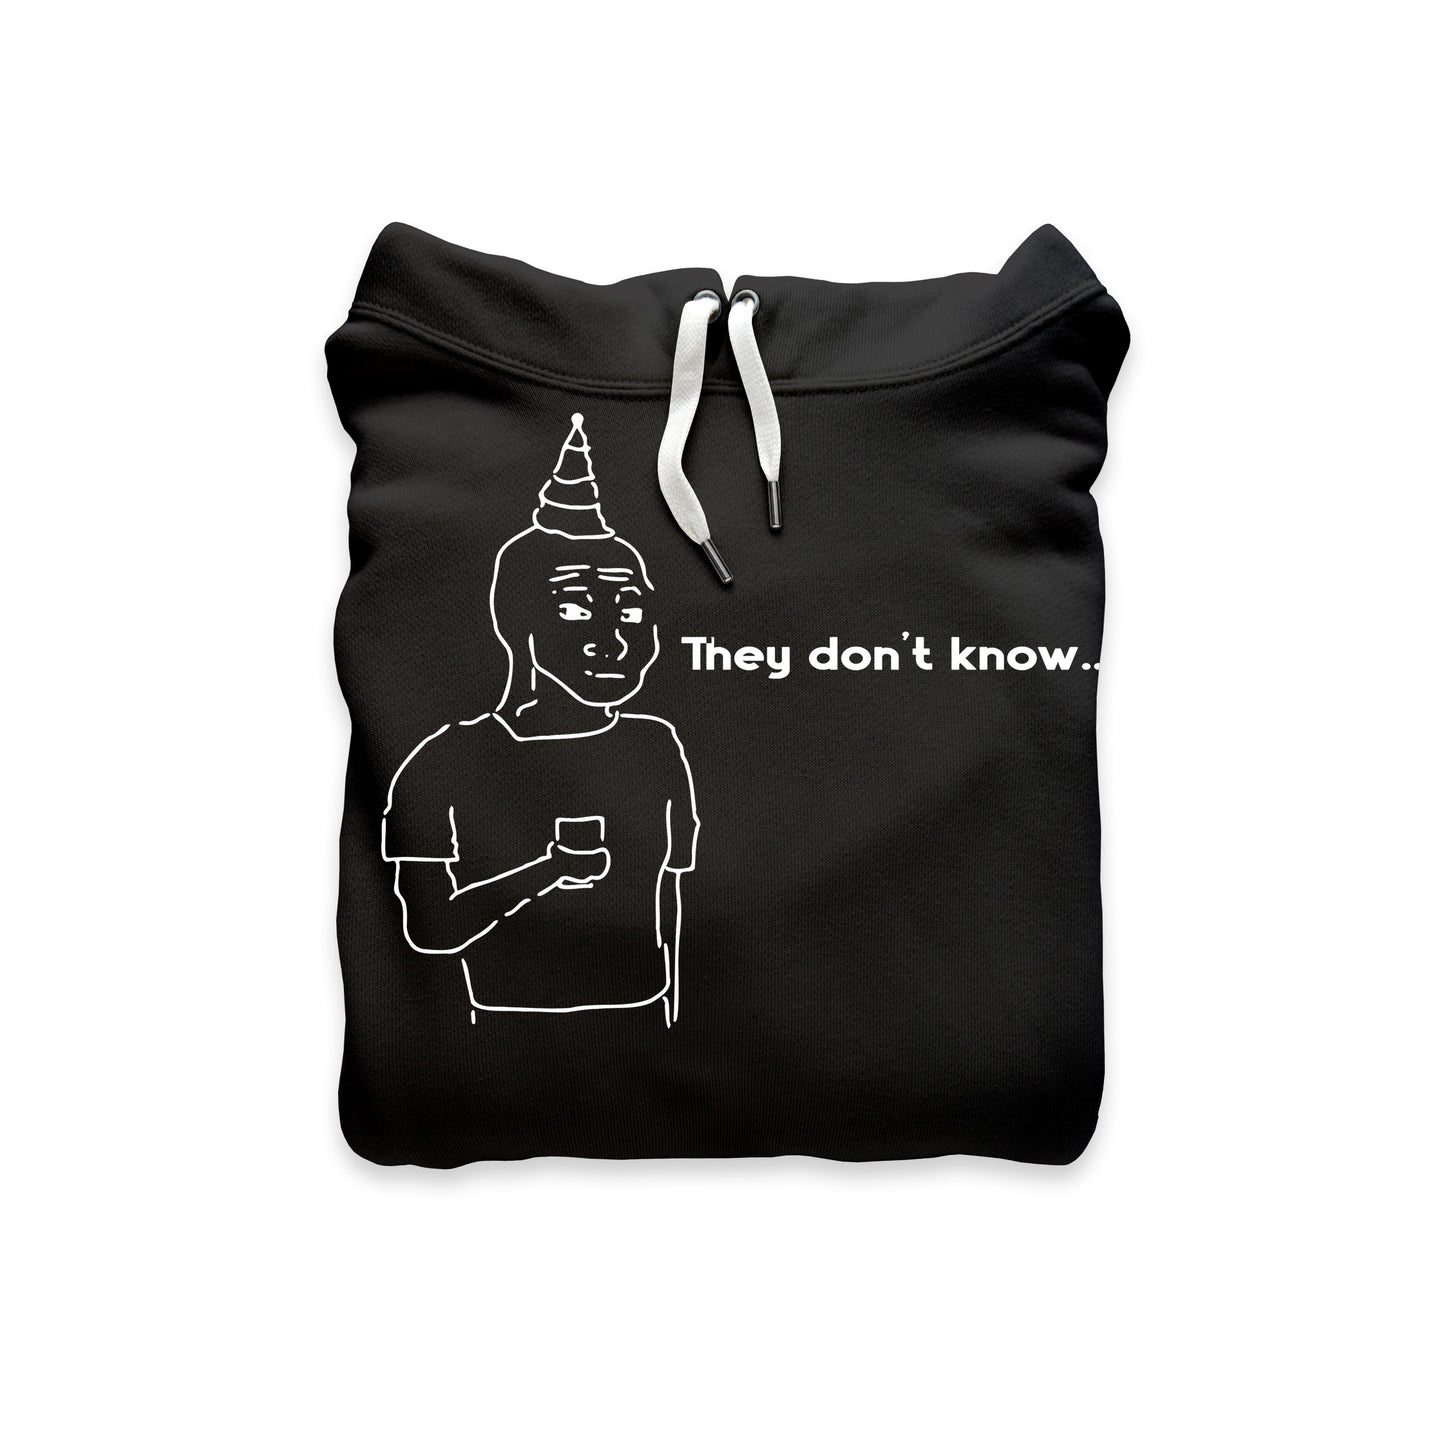 They Don't Know... Hoodie